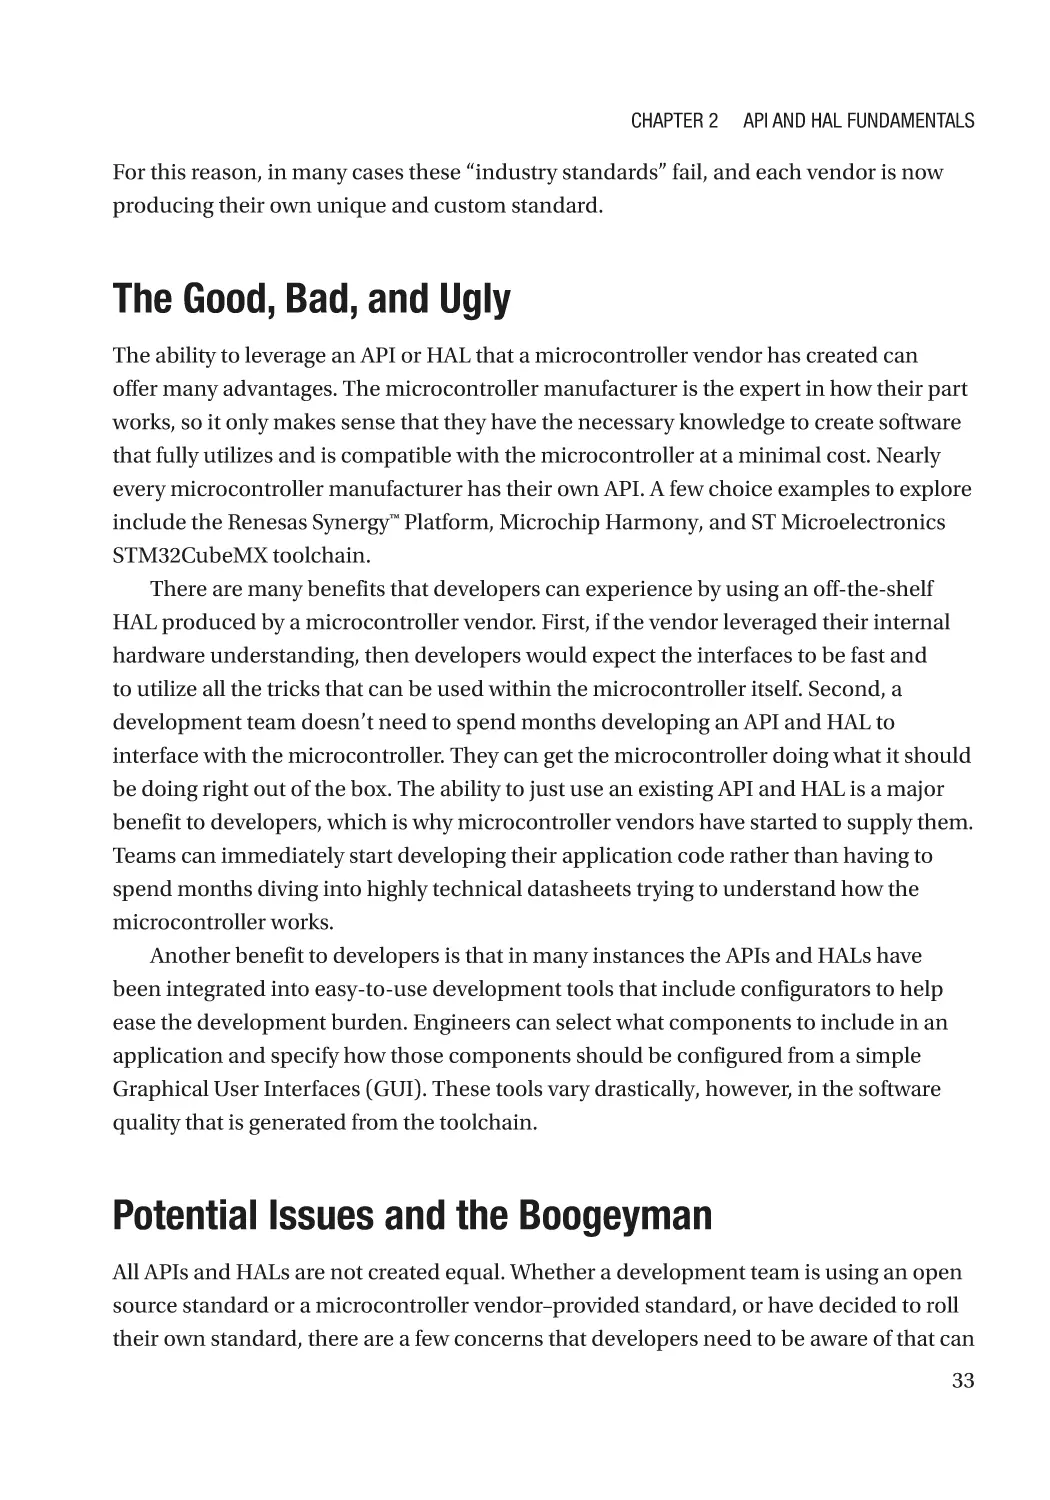 The Good, Bad, and Ugly
Potential Issues and the Boogeyman